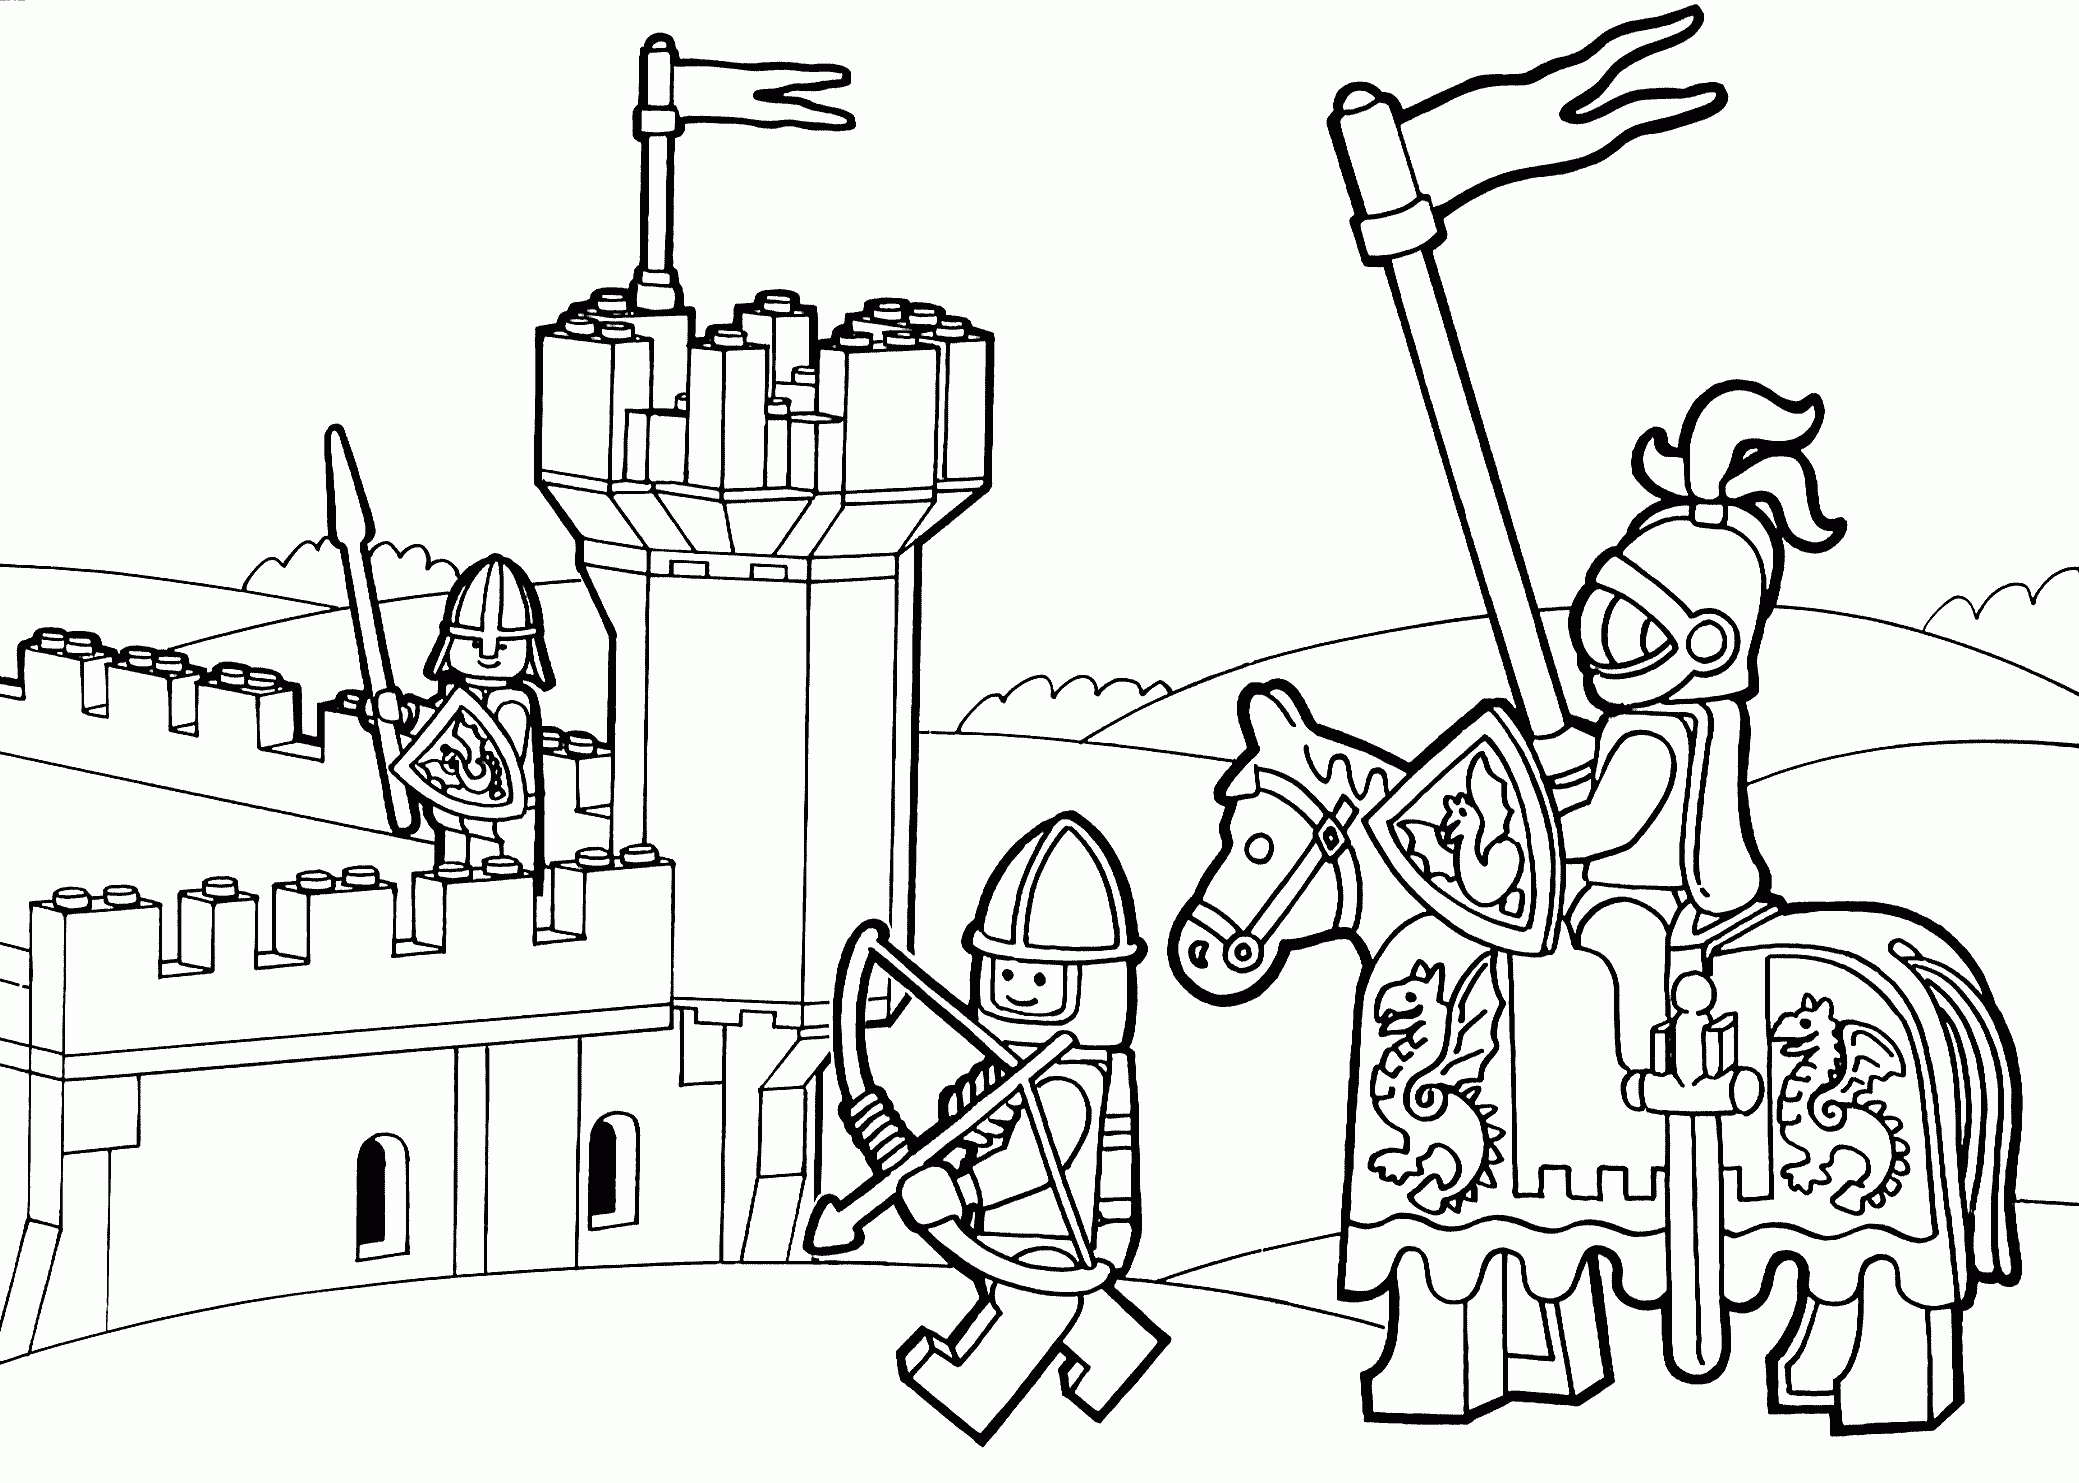 Lego Duplo Knights Coloring Page For Kids Printable Free Lego ...